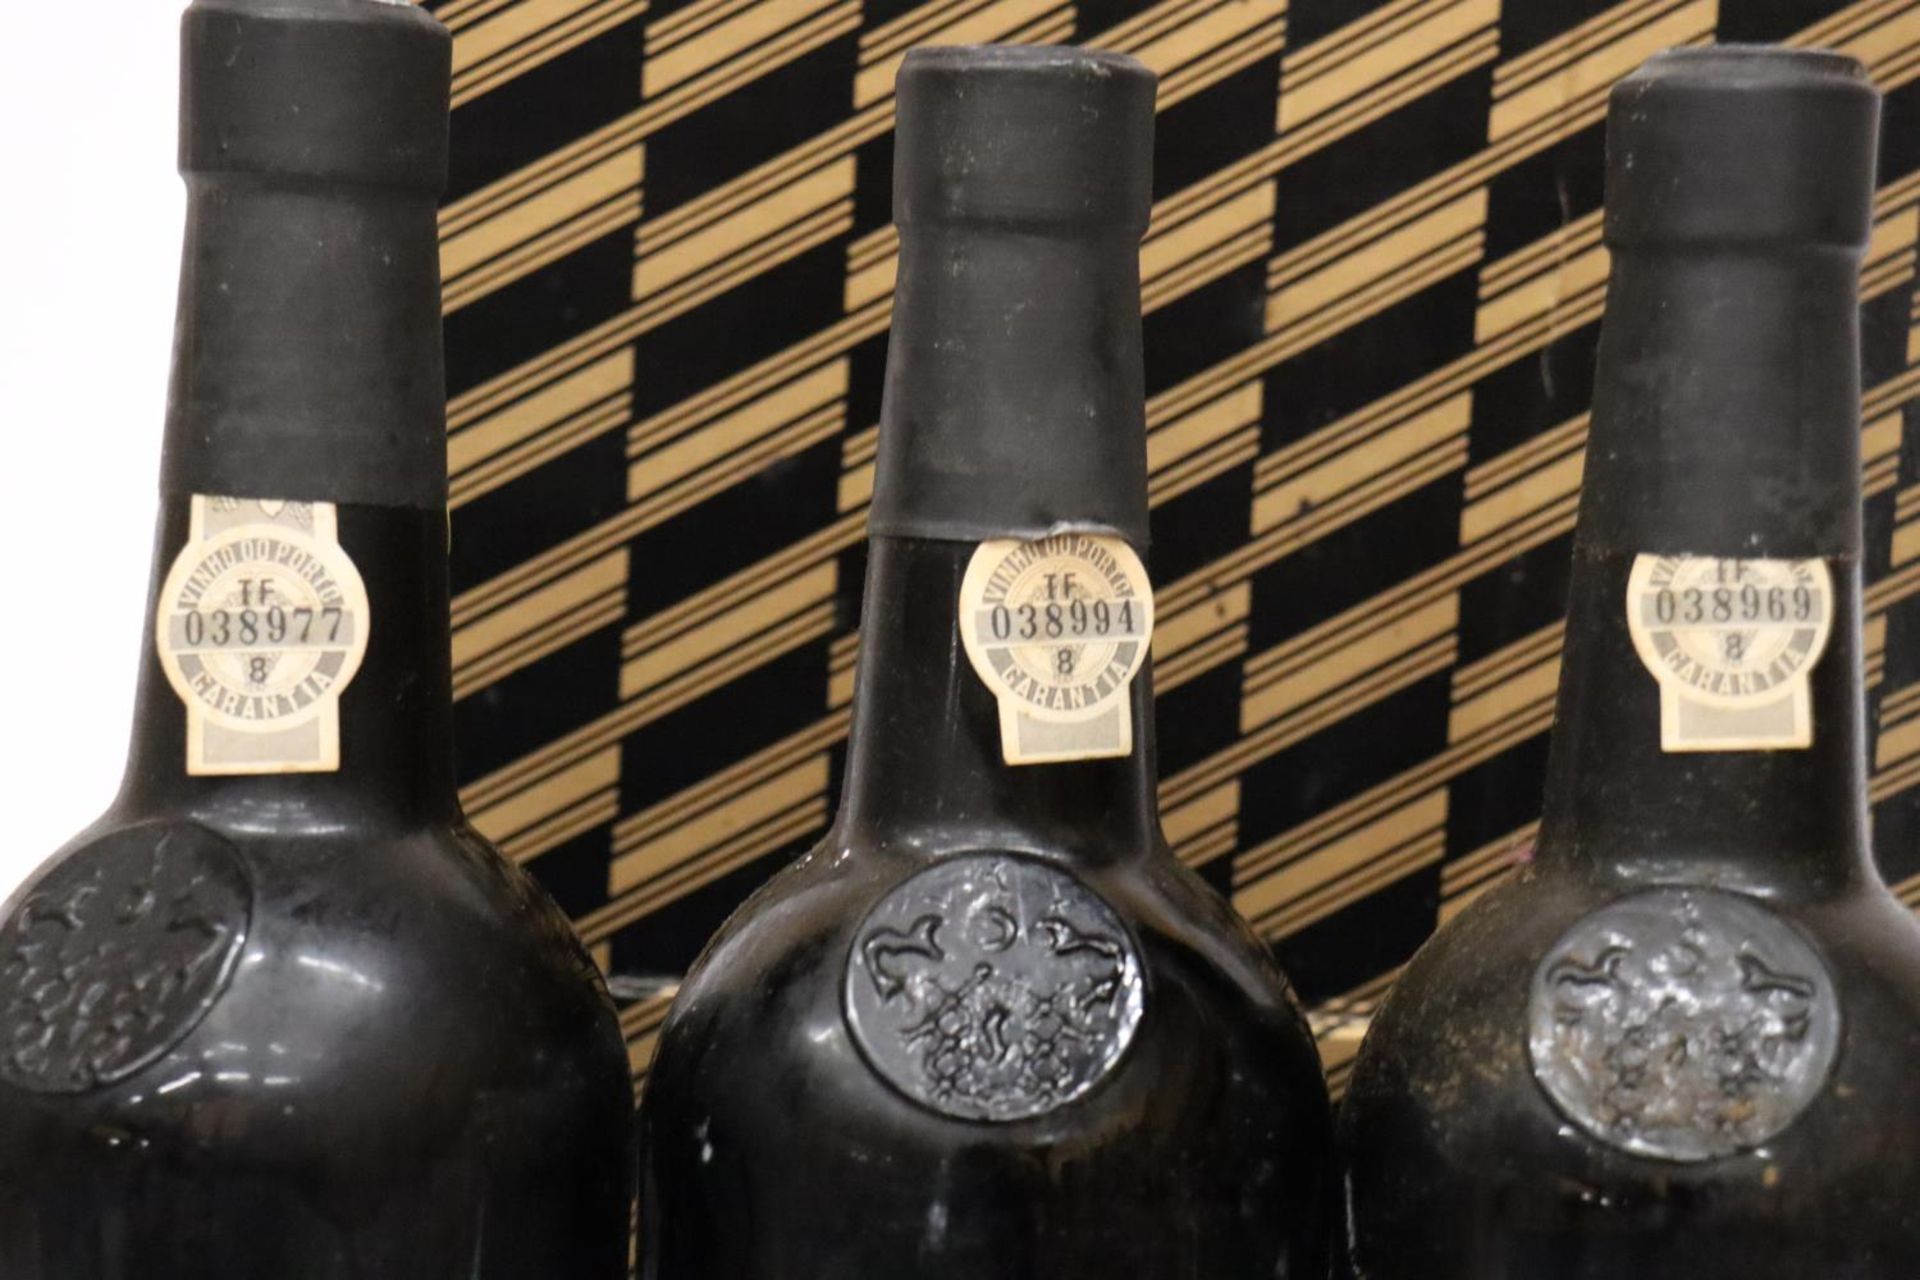 THREE BOTTLES OF FONSECAS 1975 VINTAGE PORT IN A BOX - Image 2 of 5